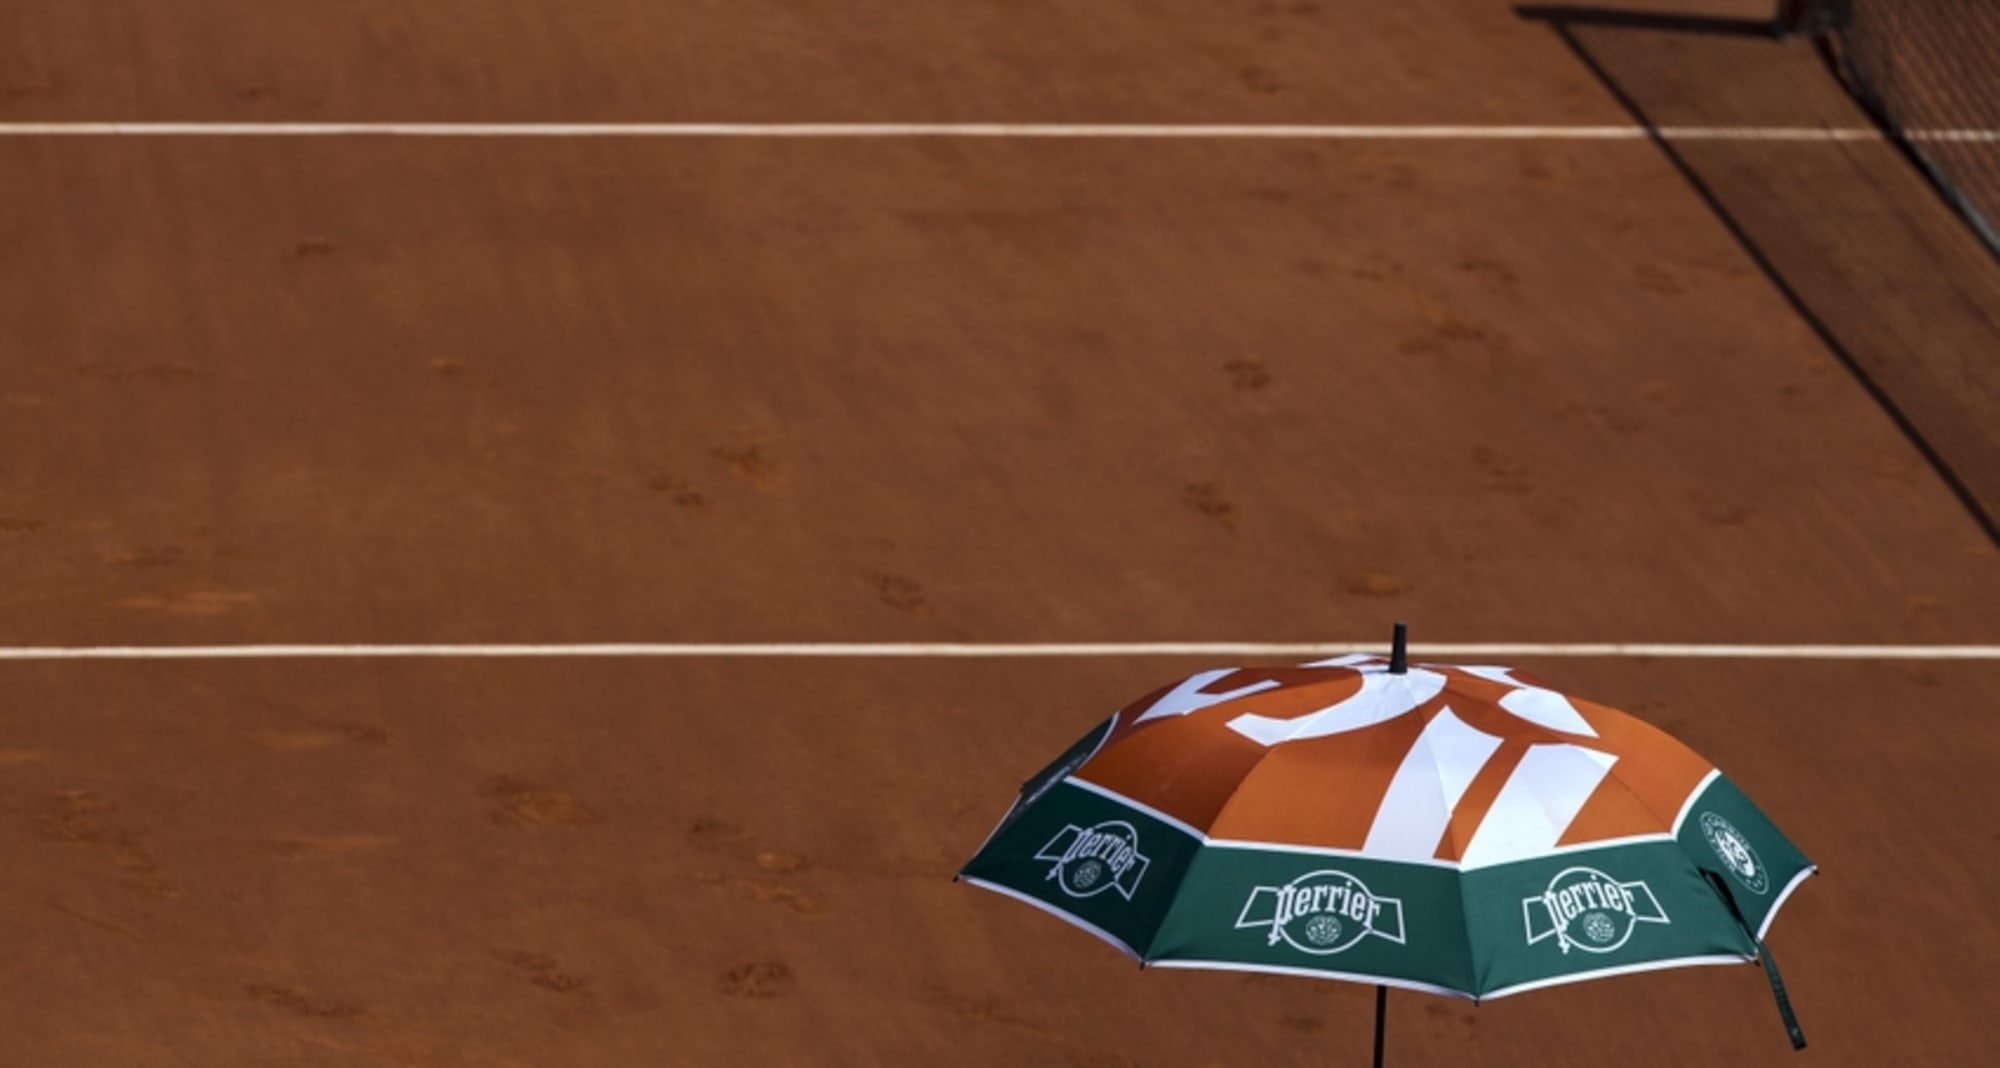 french open live results